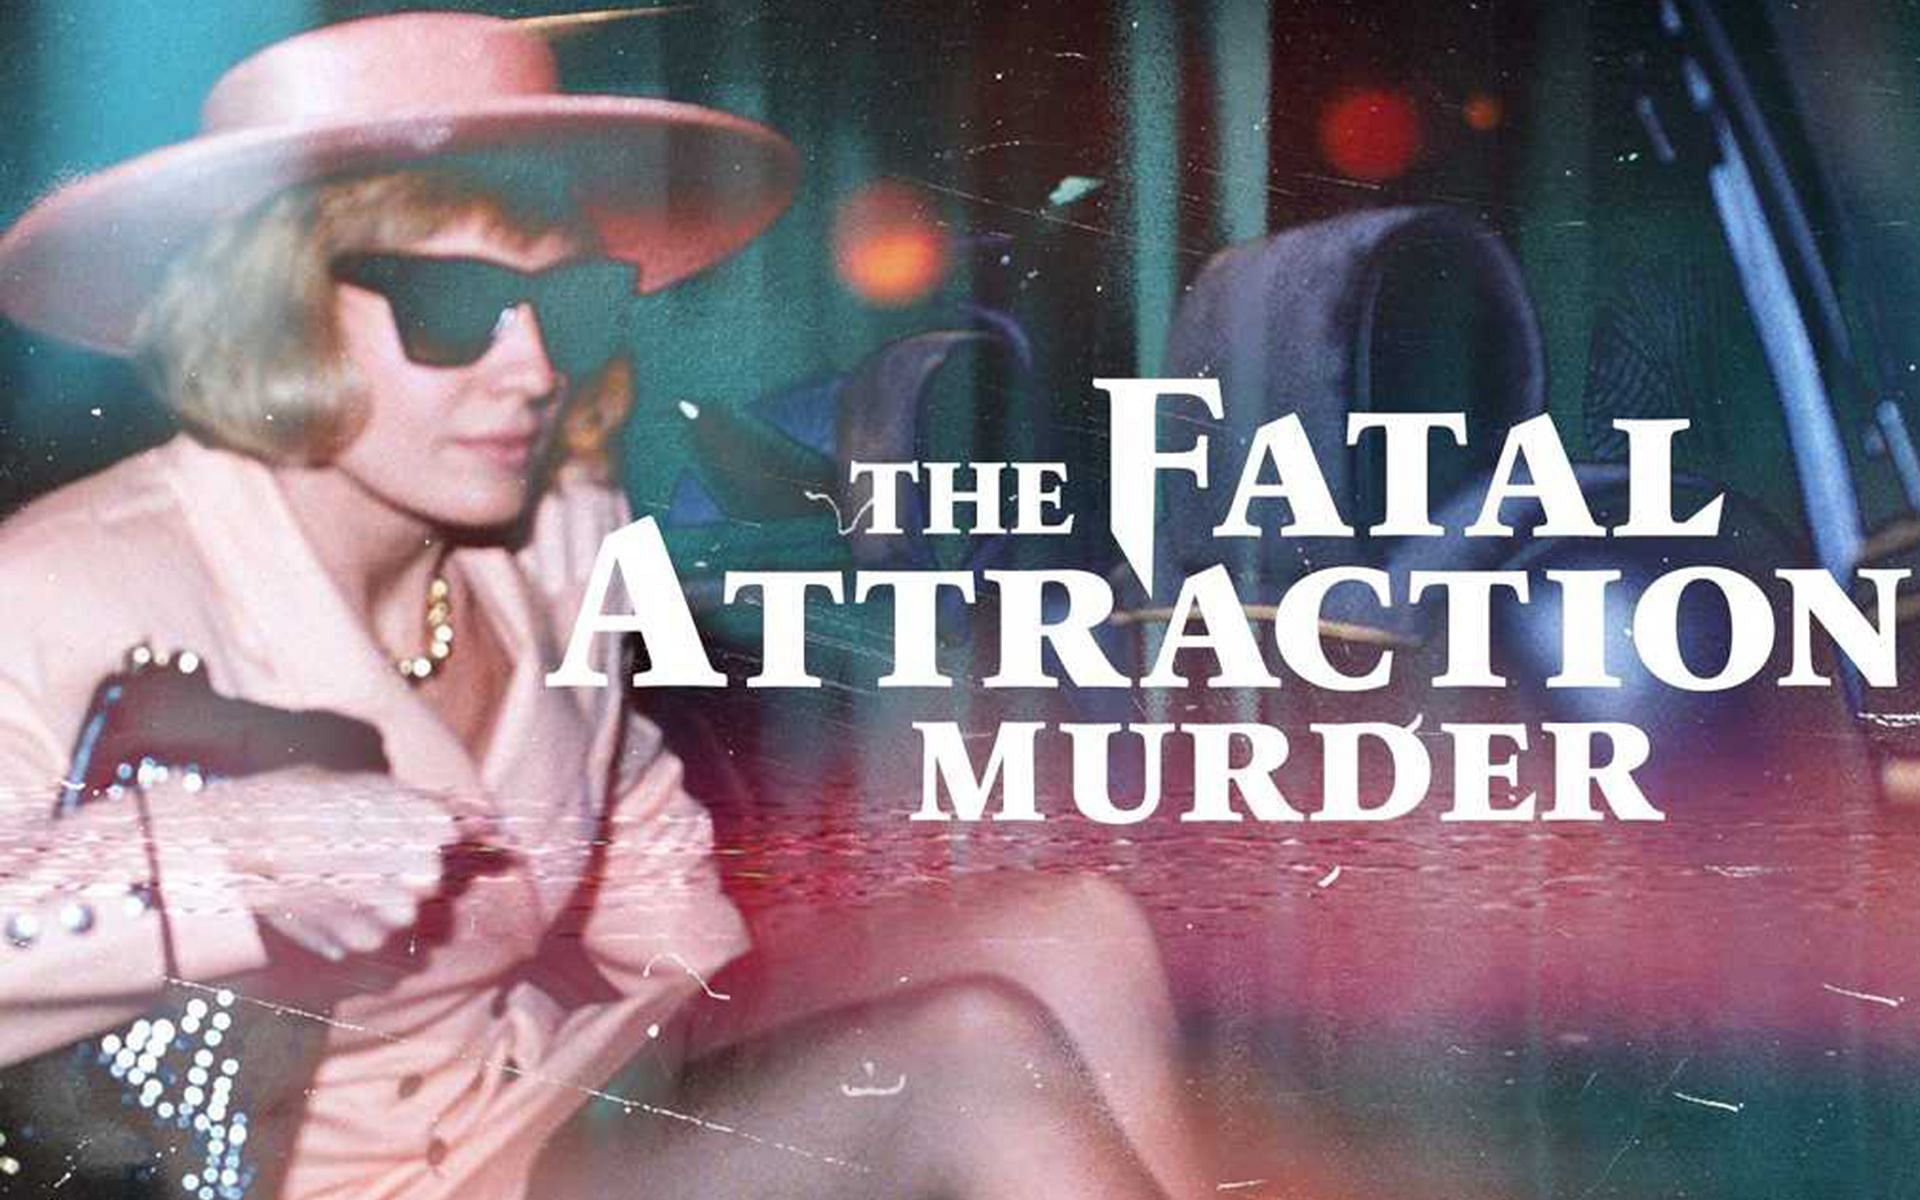 Carolyn Warmus presents her side of the murder trial in the two-night special event of &#039;The Fatal Attraction Murder&#039; (Image via @MattSpillane/Twitter)